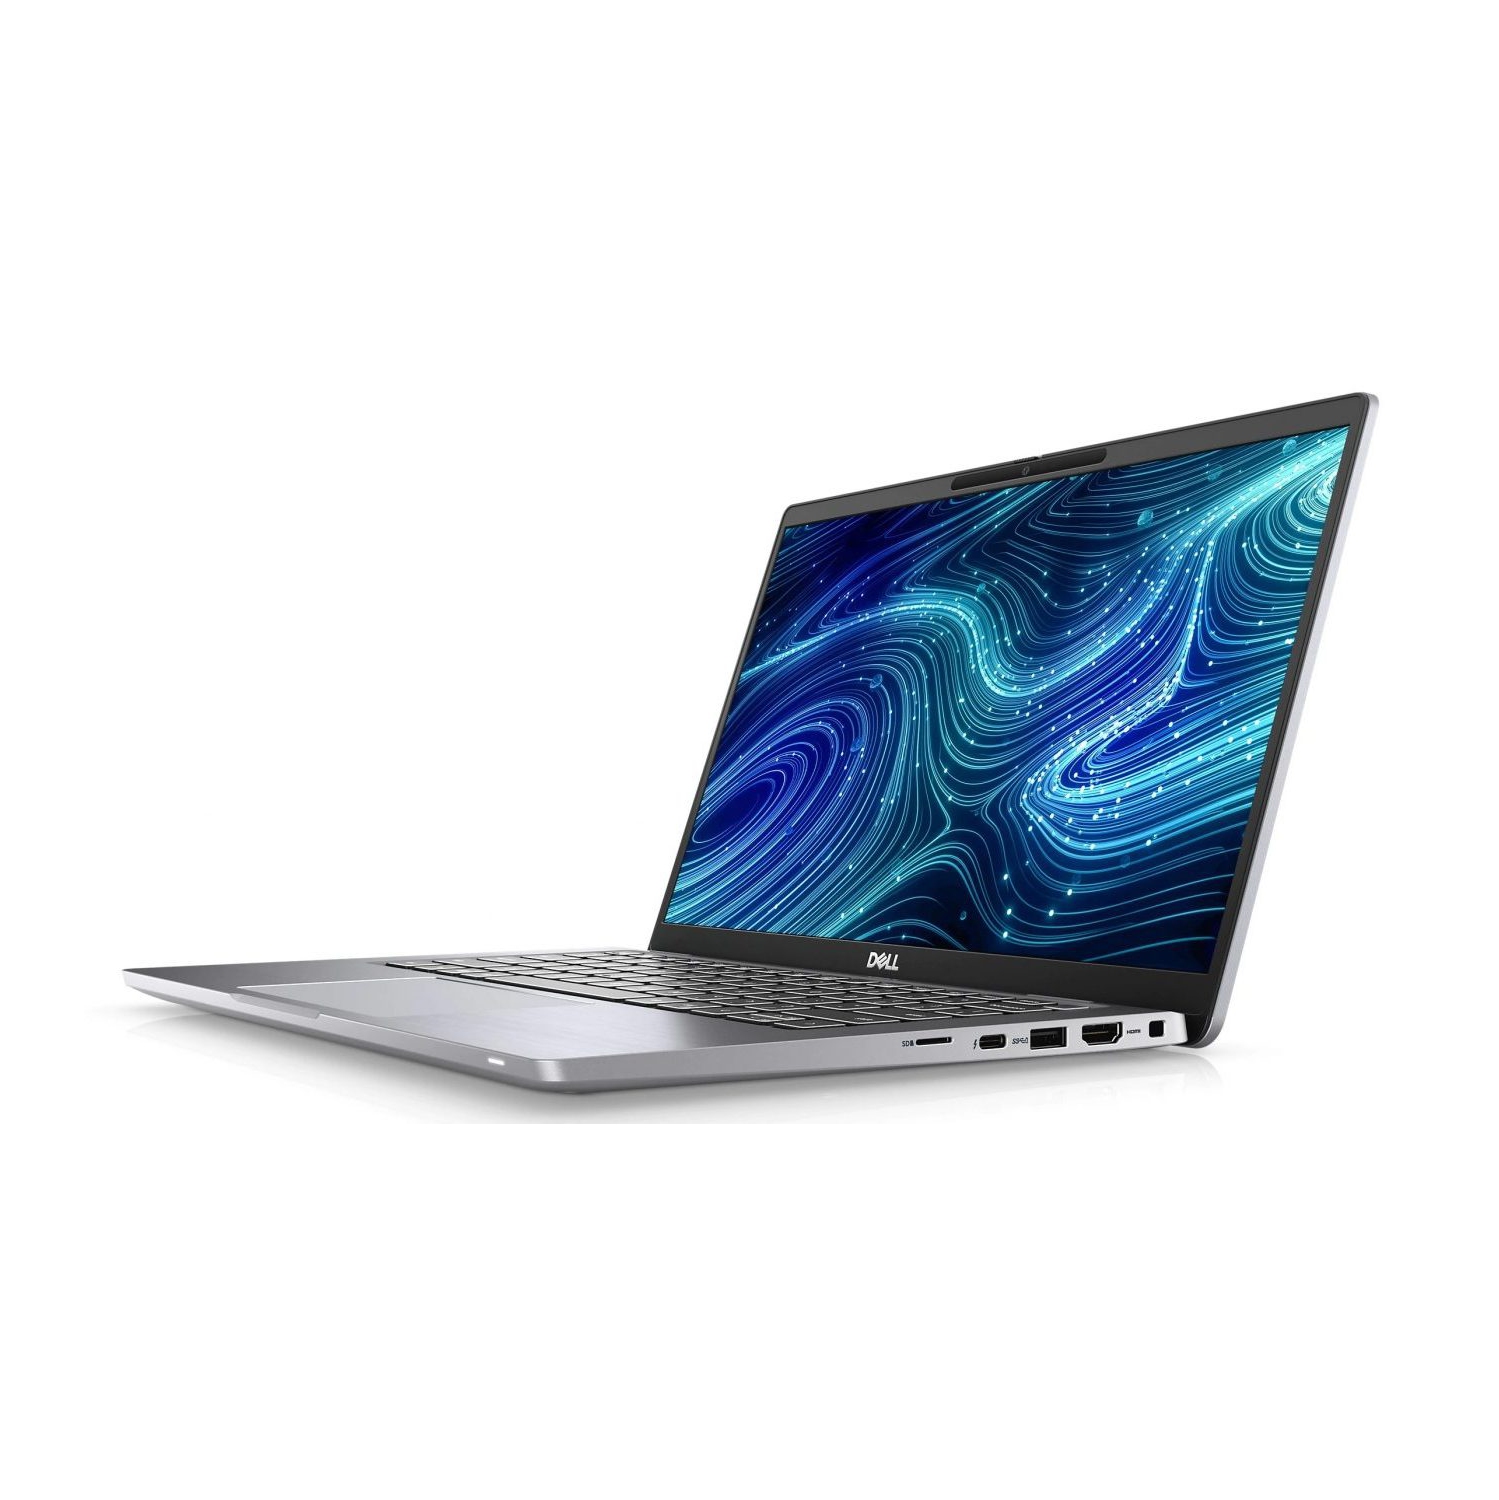 Refurbished (Excellent) - Dell Latitude 7000 7420 Laptop (2021) | 14" FHD | Core i7 - 256GB SSD - 16GB RAM | 4 Cores @ 4.7 GHz - 11th Gen CPU Certified Refurbished